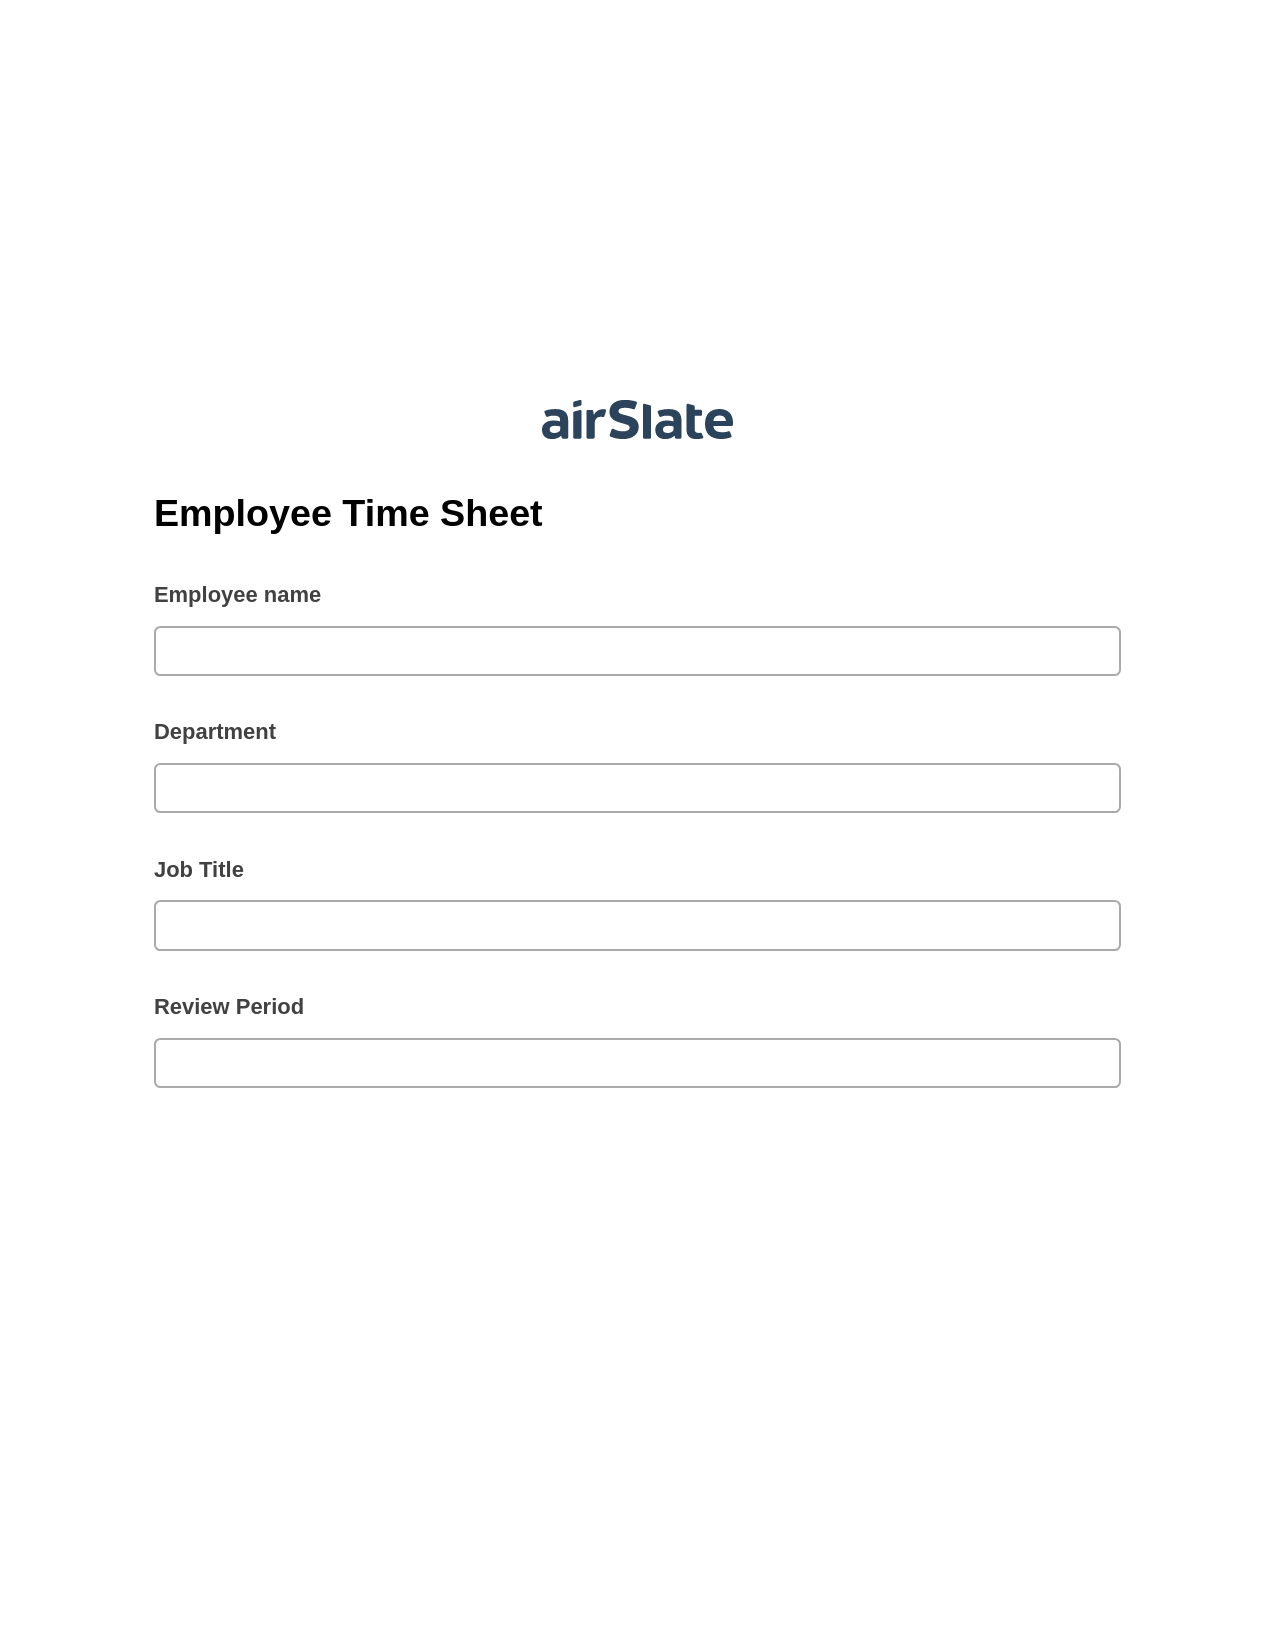 Employee Time Sheet Pre-fill Dropdowns from Excel Bot, Update Audit Trail Bot, Archive to Google Drive Bot